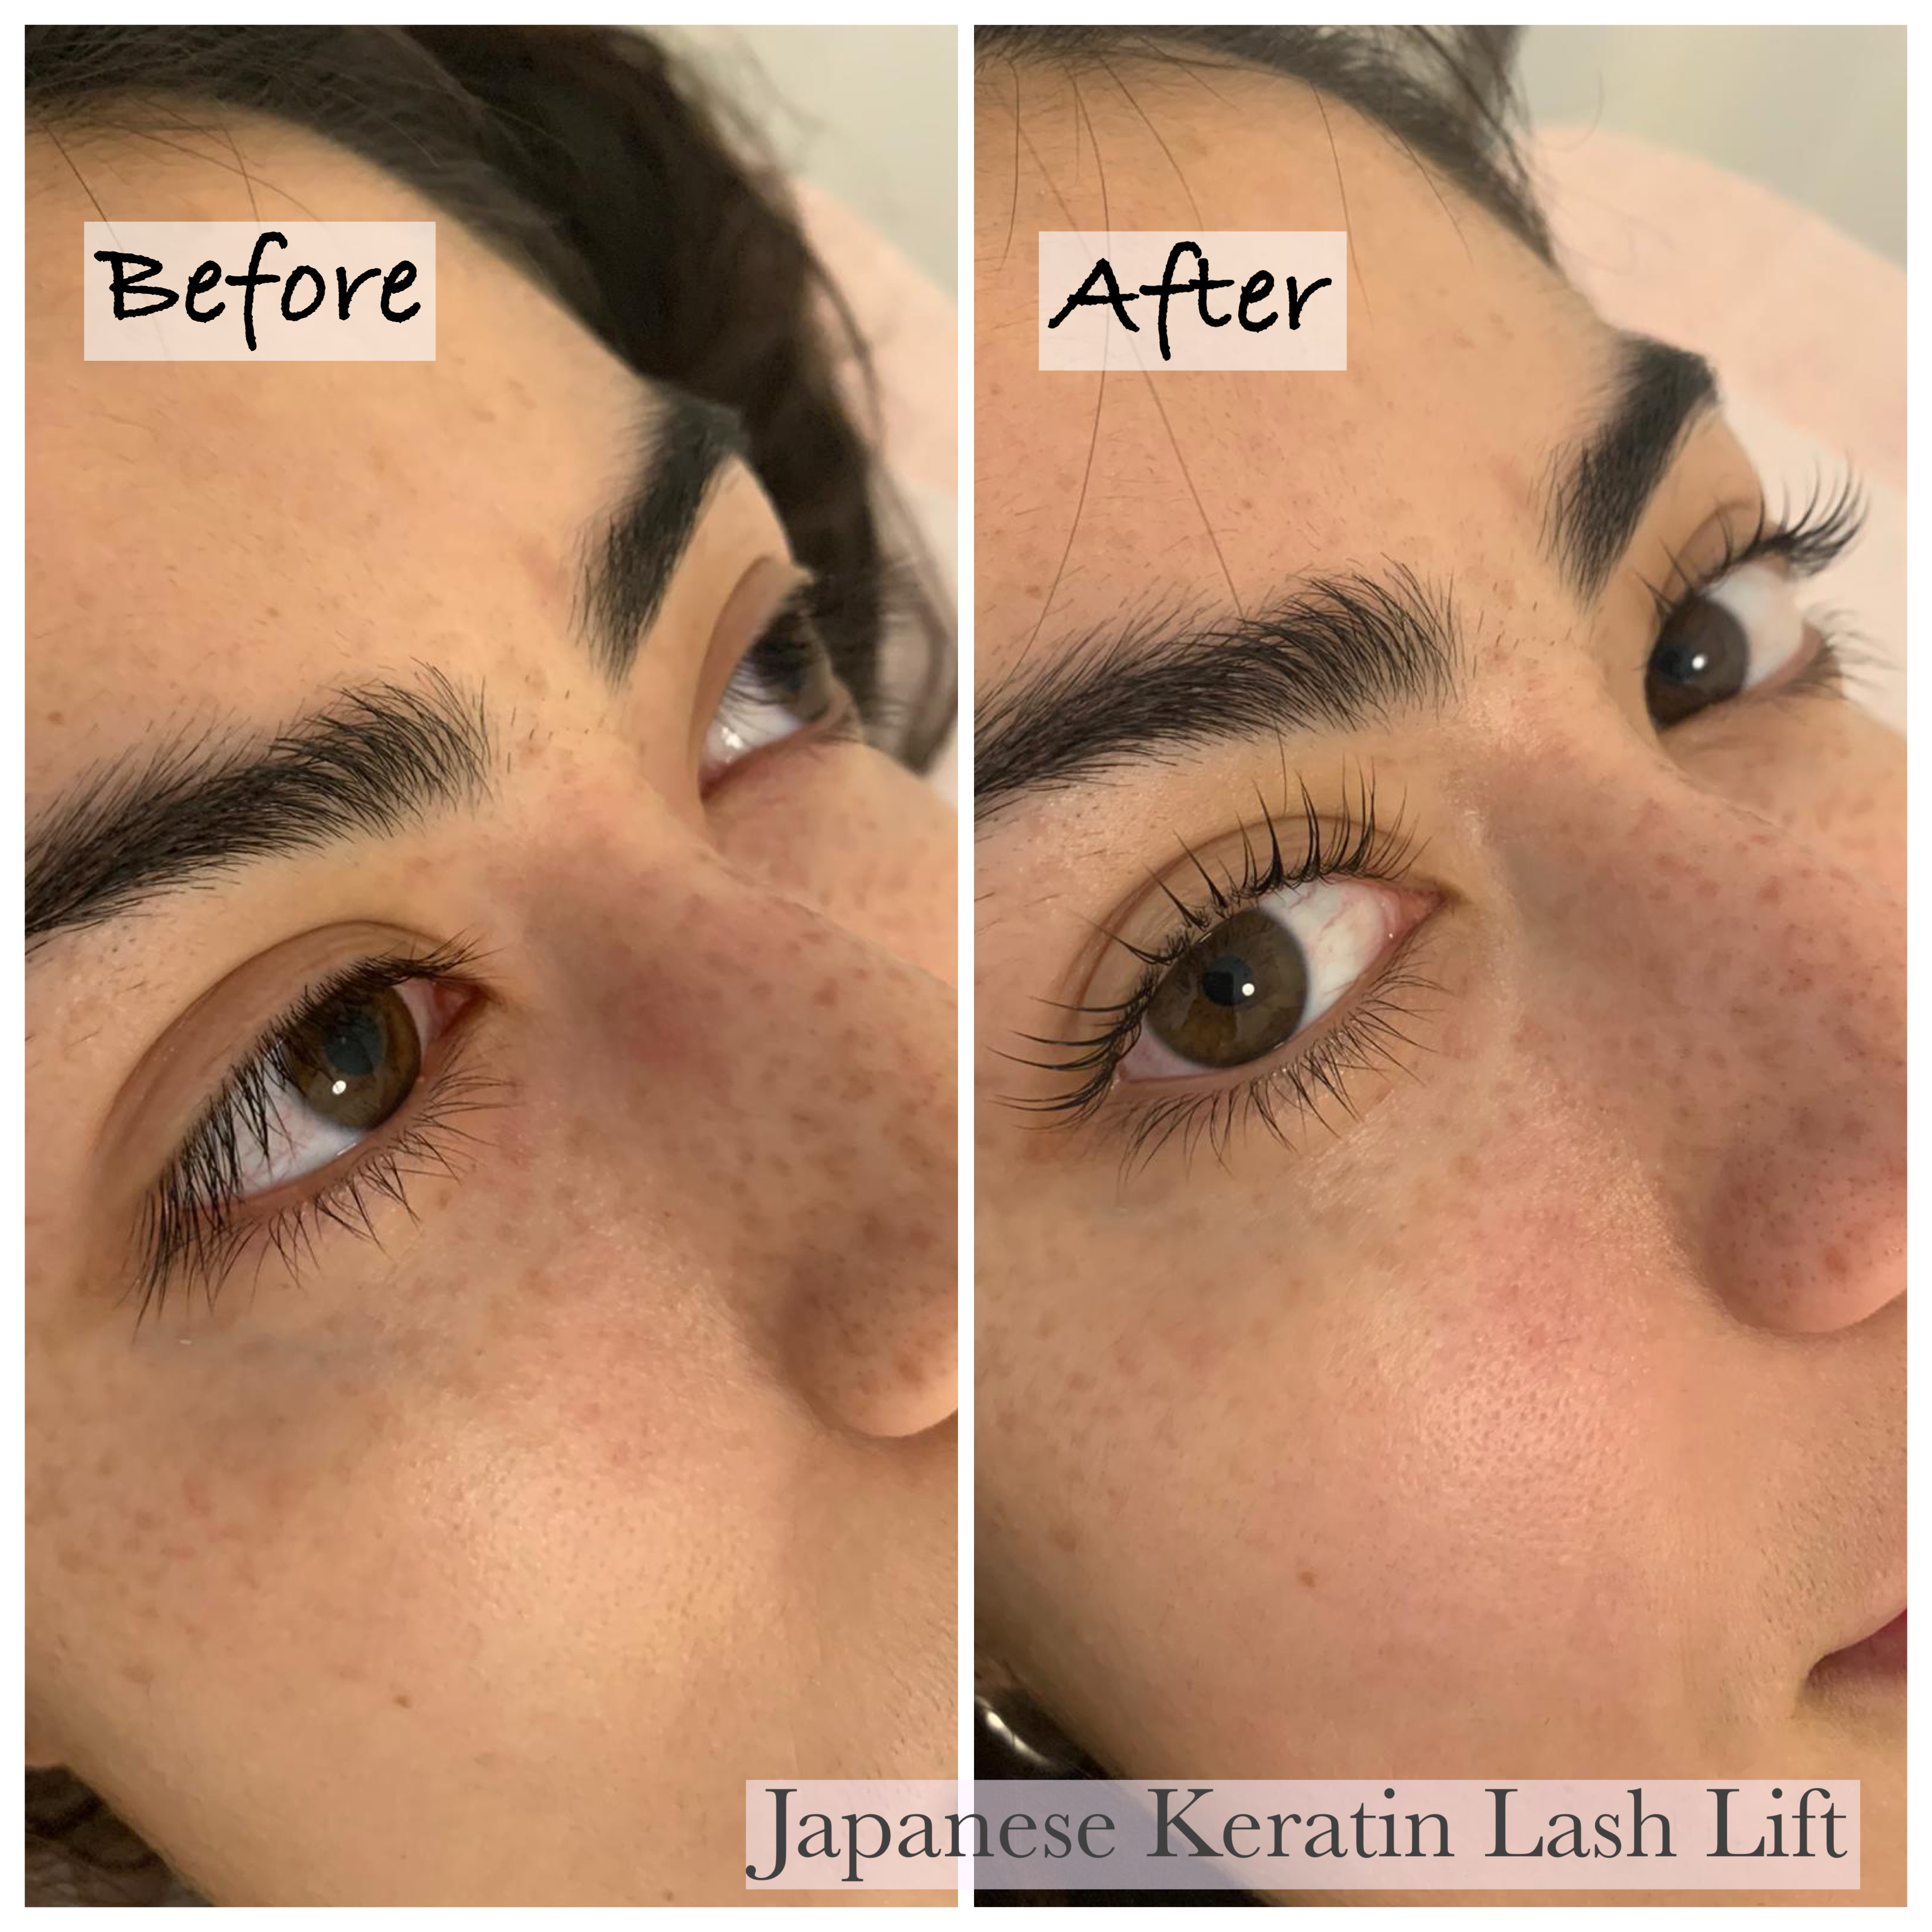 All about the Japanese Lash Lift, its and aftercare - LUCIA